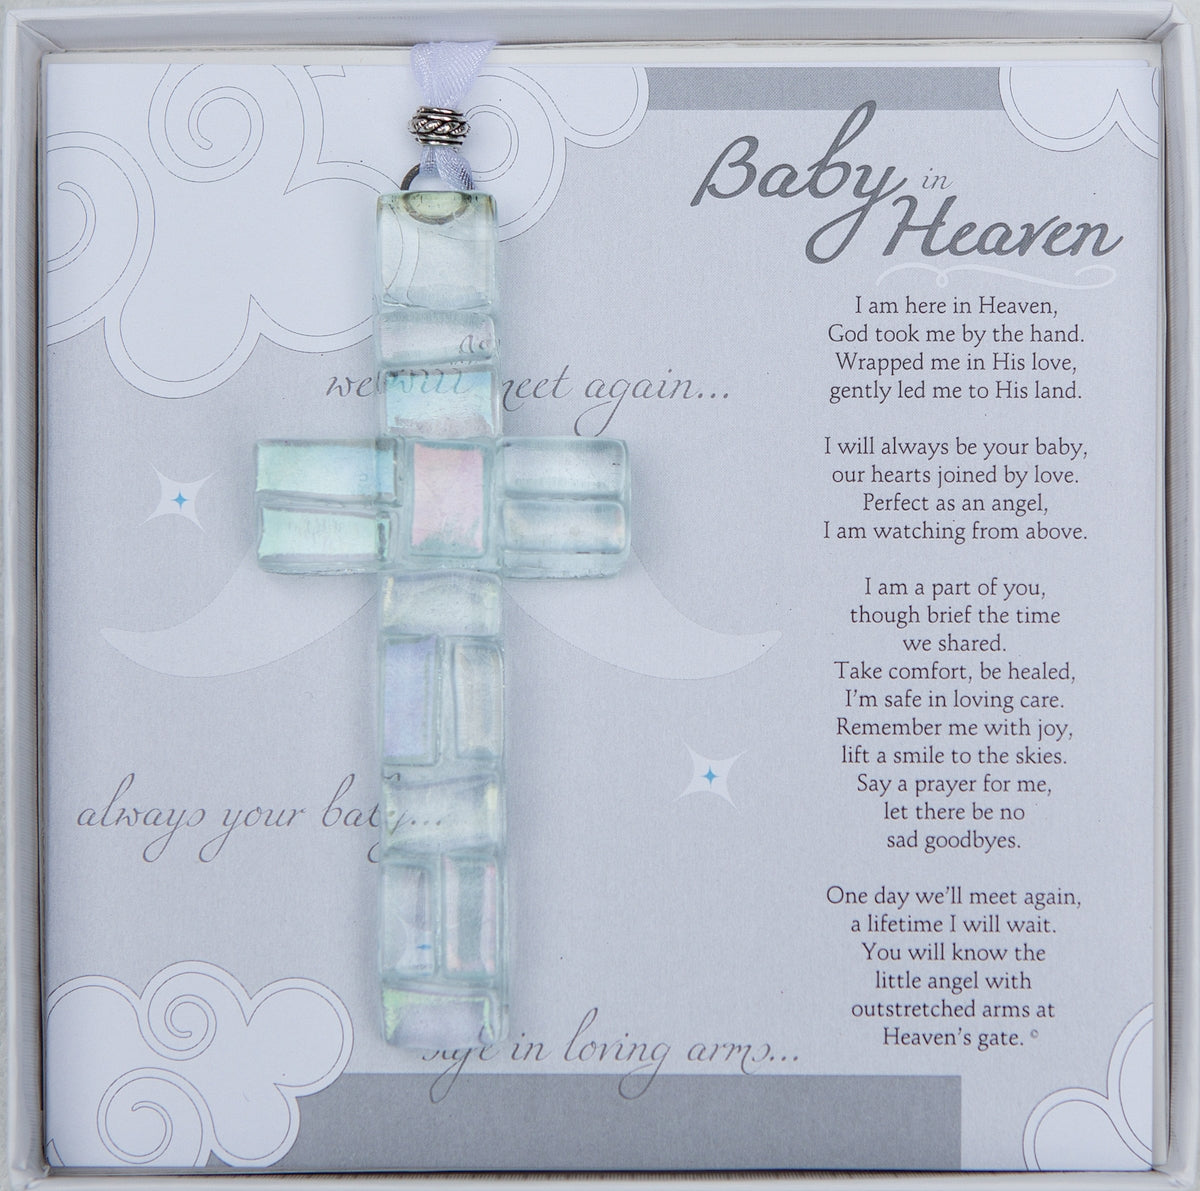 Baby in Heaven: Infant Loss Memorial Handmade Clear Mosaic Cross with Baby in Heaven sentiment on a folding card; packaged in a white 5.5"x5.5" box with a clear lid.